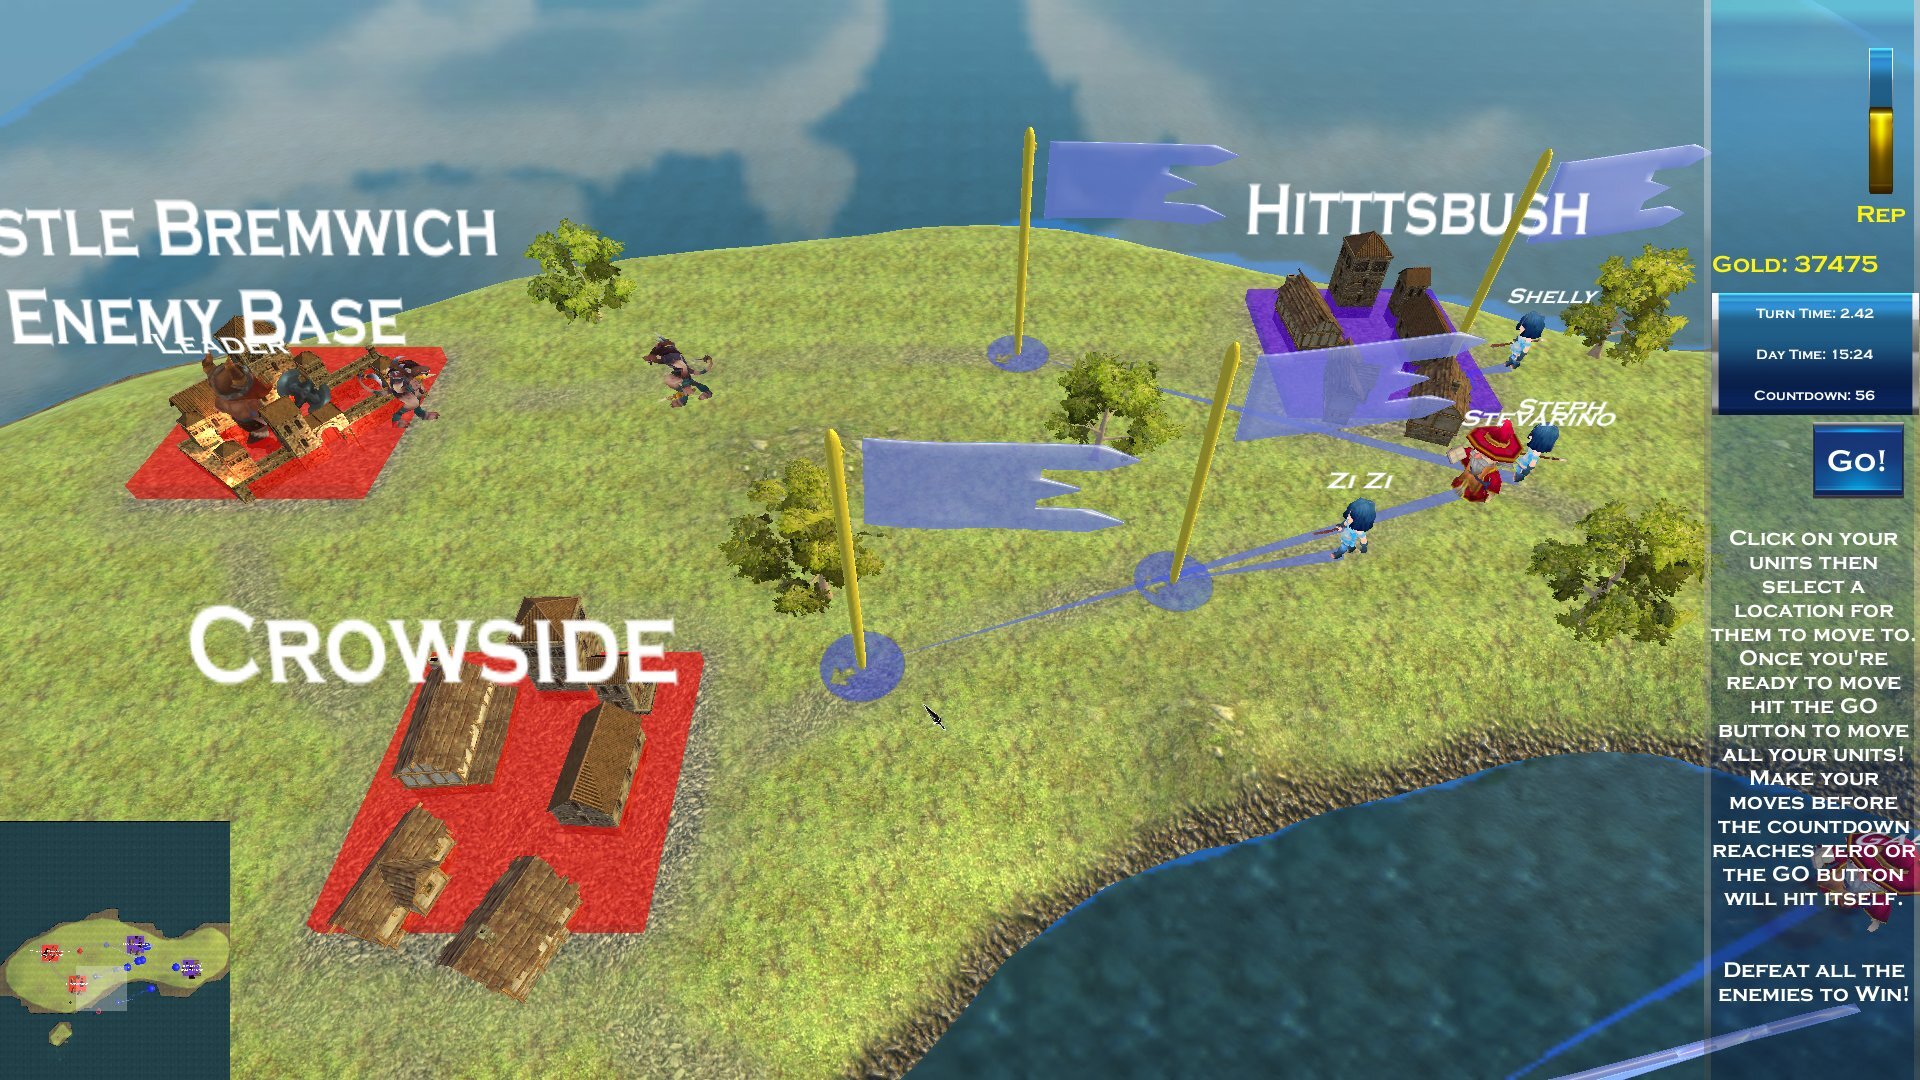  Stage 2 Island focuses on learning to defend the base. 